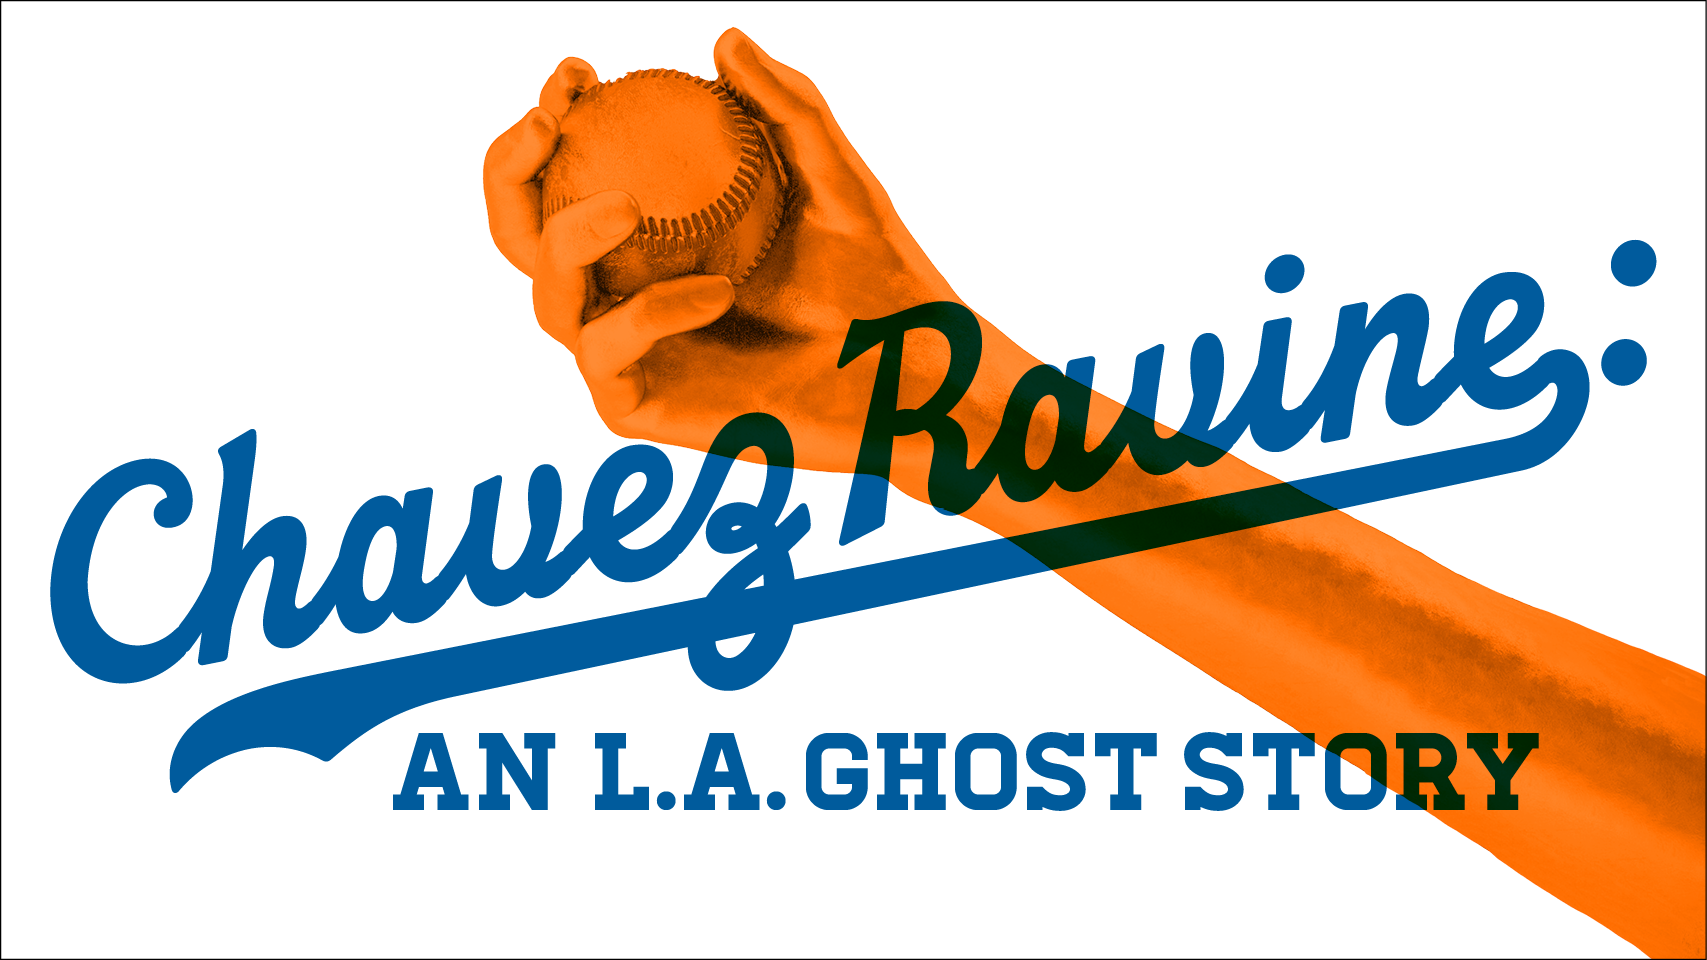 Chavez Ravine An L.A. Ghost Story